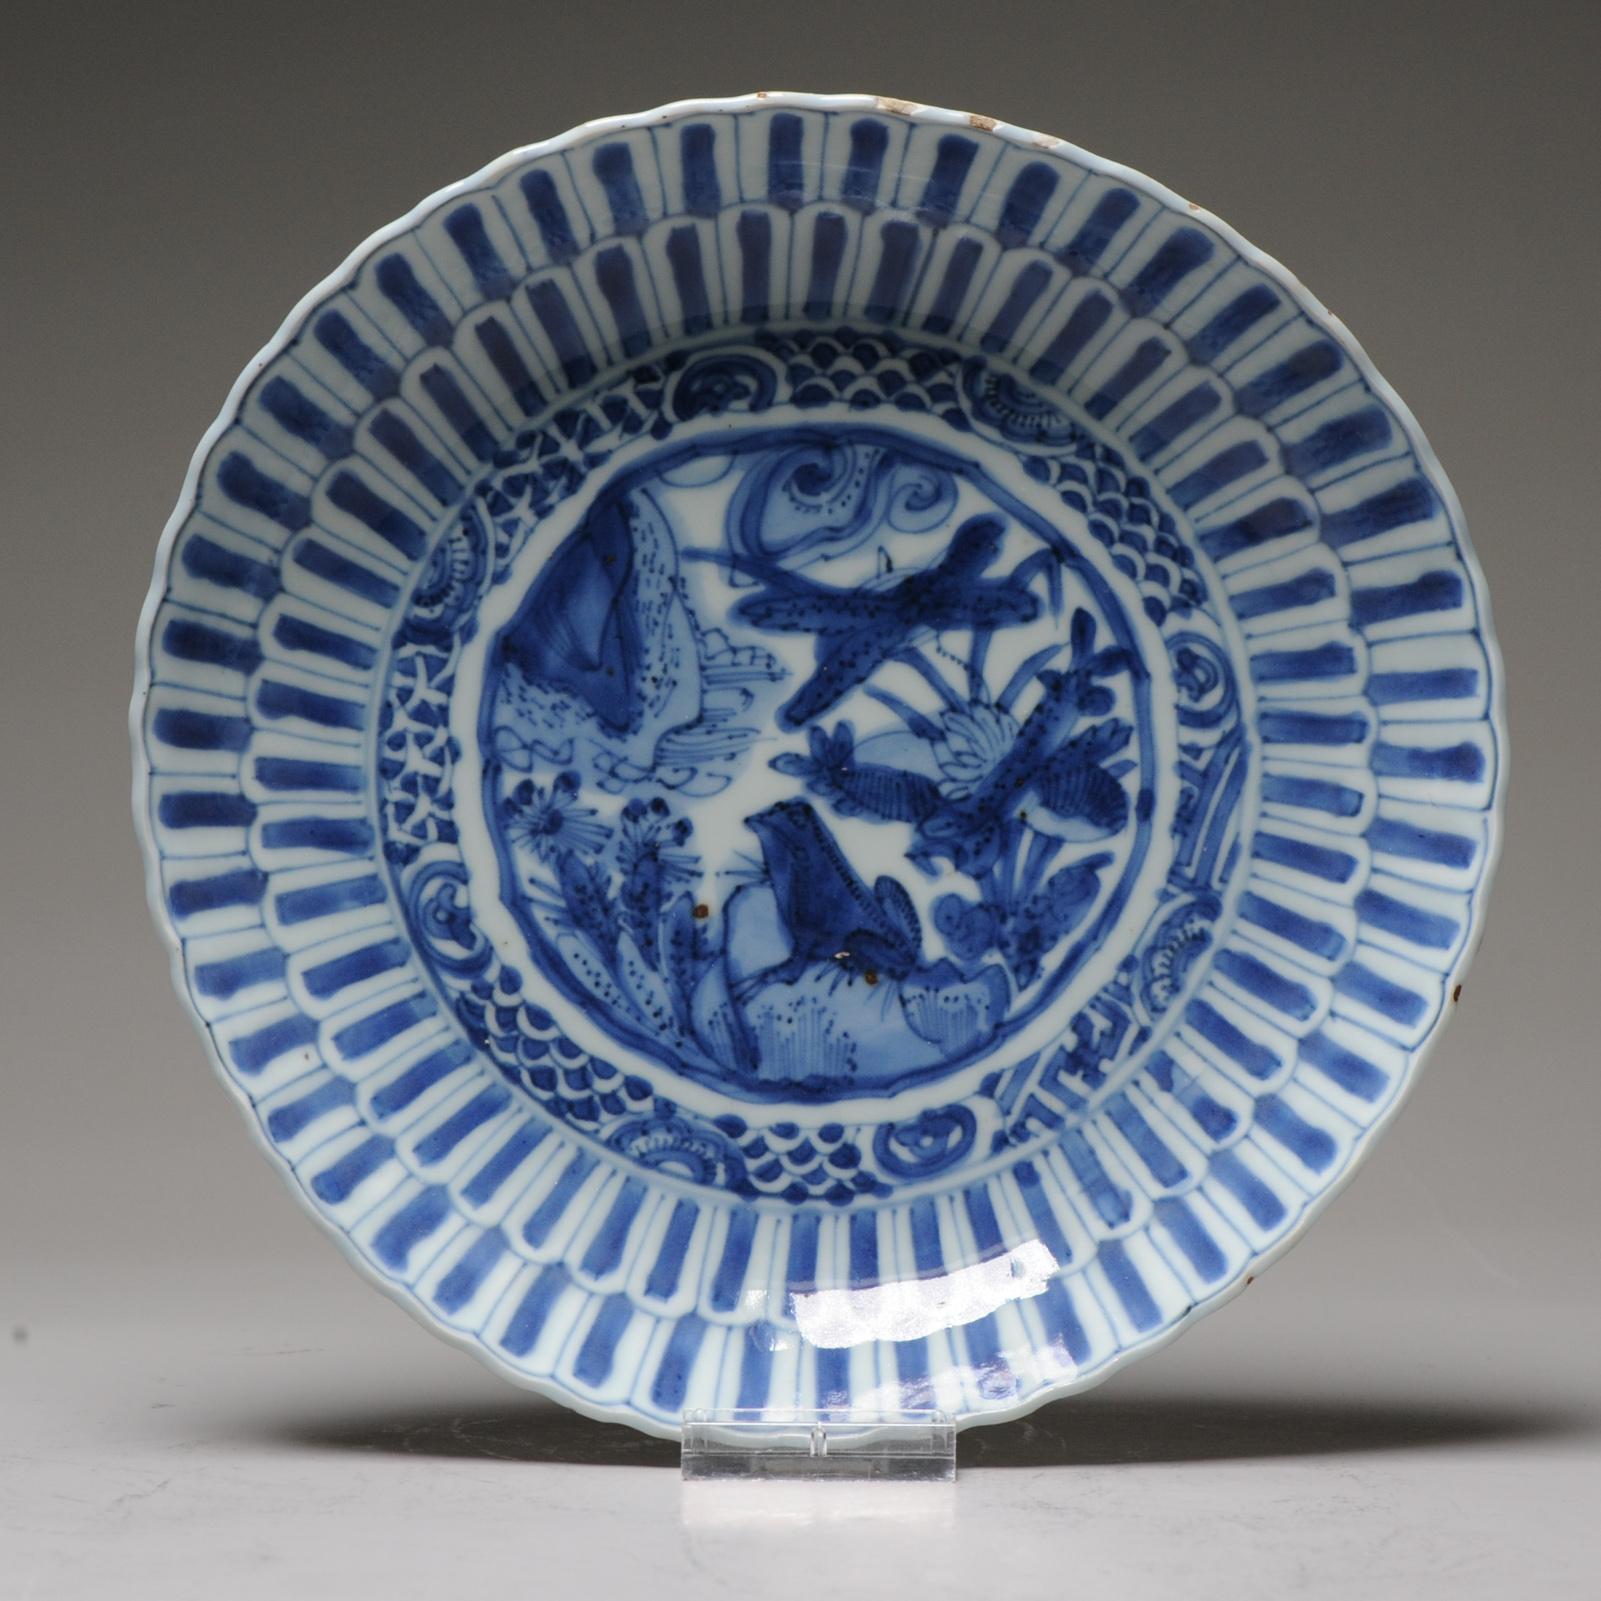 Description

A very nicely decorated plate with a Frog on on a rock in a landscape scene. Wanli, Tianqi or Chongzhen Period 1590 – 1640

With a nice moulded double chrysanthemum petal rim.

Similar piece pictured in:
Ko-Sometsuke (two volume